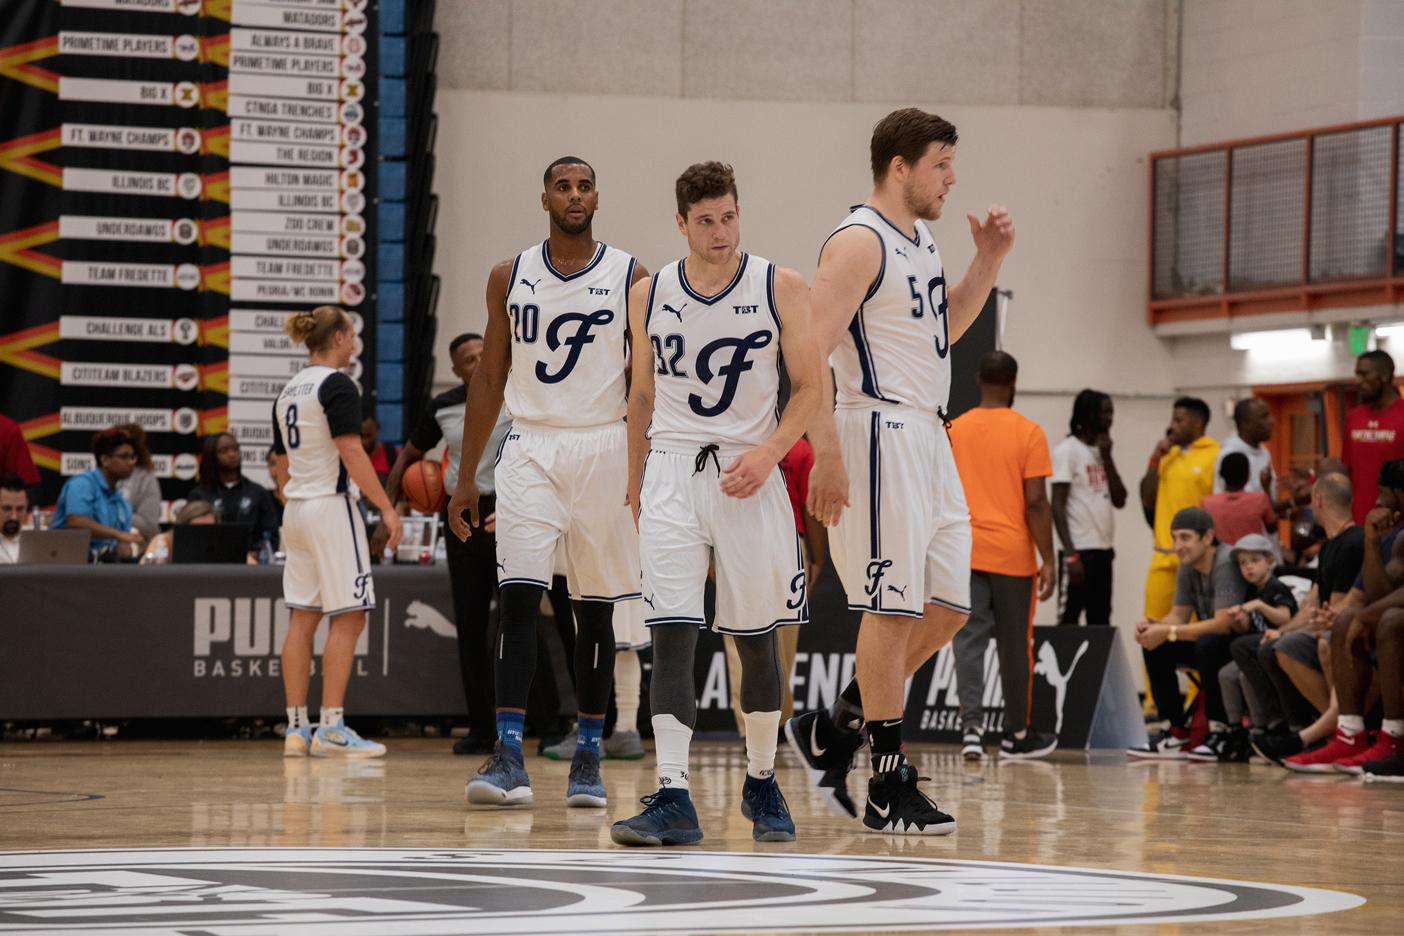 Jimmer Fredette and Brandon Davies on the basketball court of during the 2018 The Basketball Tournament